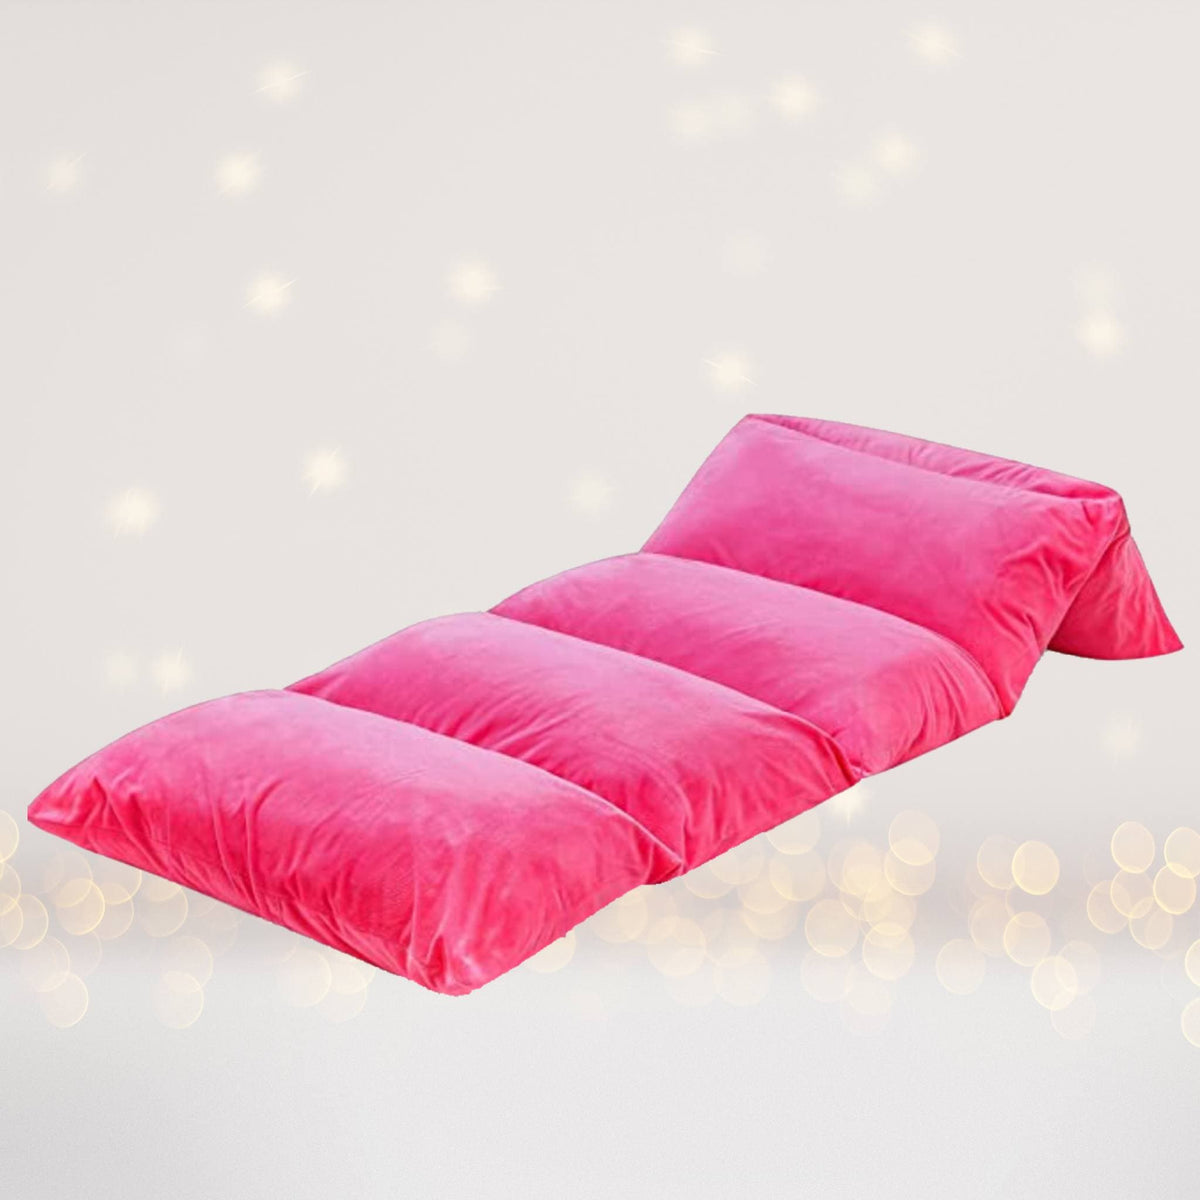 http://www.chickychickyblingbling.com/cdn/shop/products/hot-pink-pillow-bed-hot-pink-pillow-bed-floor-lounger-829872_1200x1200.jpg?v=1674256916